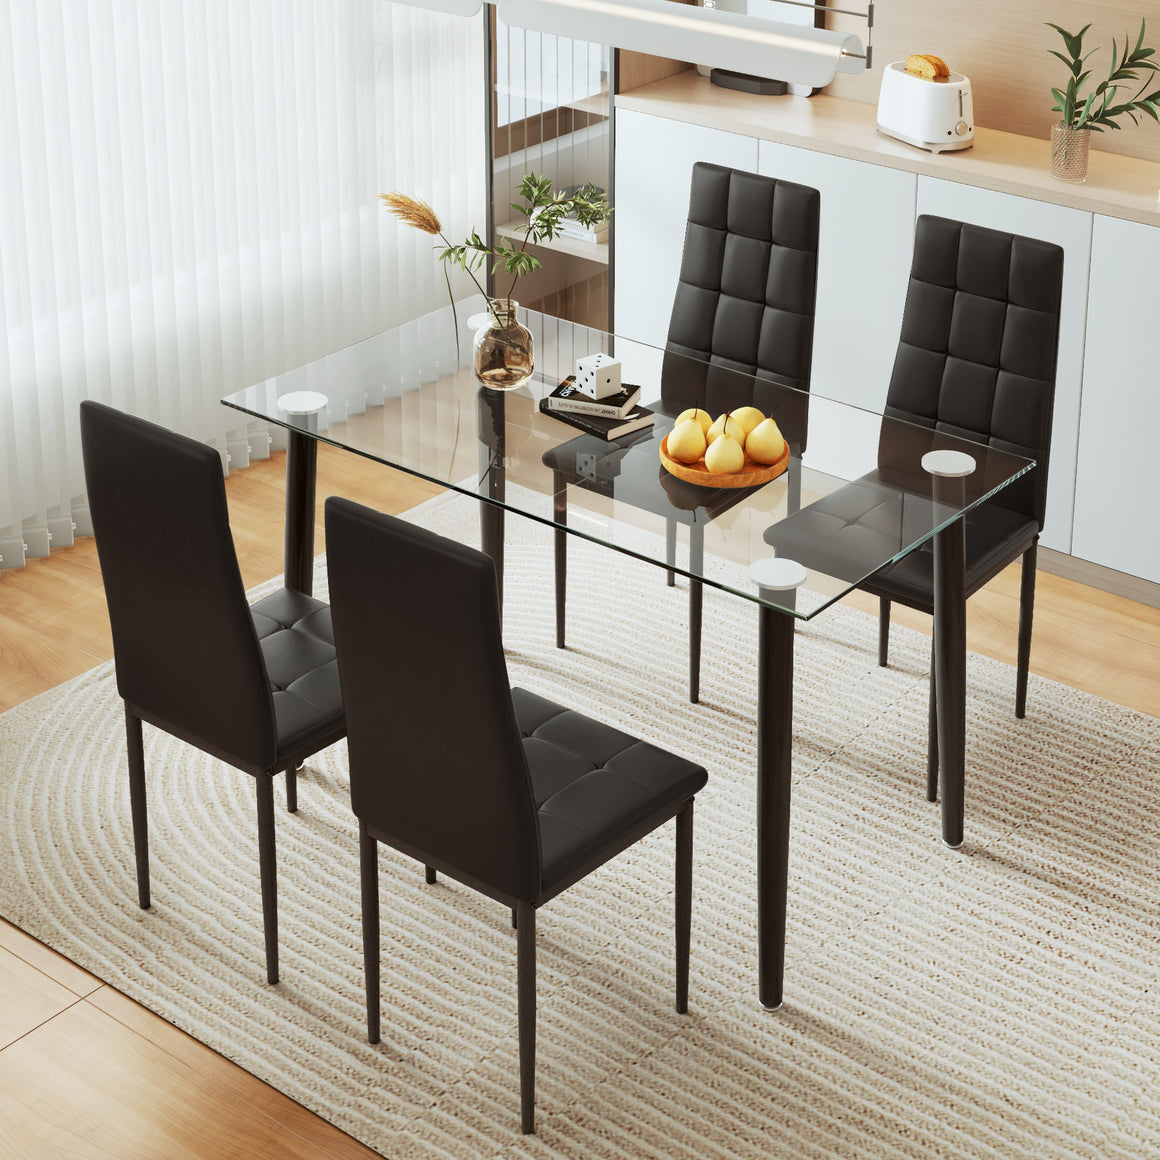 uhomepro 5 Pieces Dining Table Set, Elegant Glass Tabletop and Chairs for 4, Upgraded Metal Frame Table and 4 Leather Chairs for Kitchen Breakfast Nook Bar Small Apartment